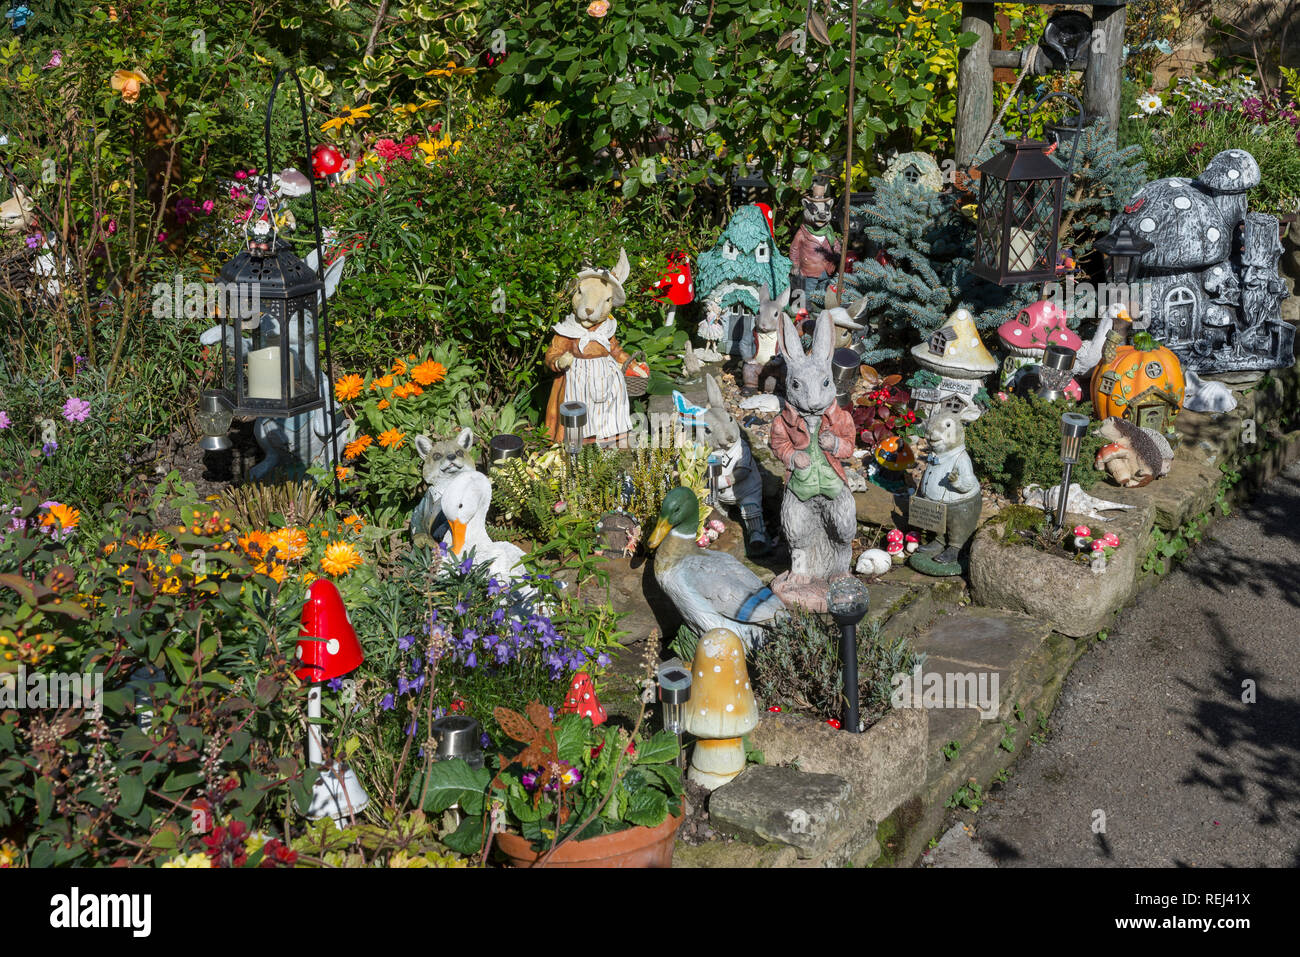 Garden full of colourful ornaments in the village of Eyam, Derbyshire, England.  The garden raises money for charity. Stock Photo